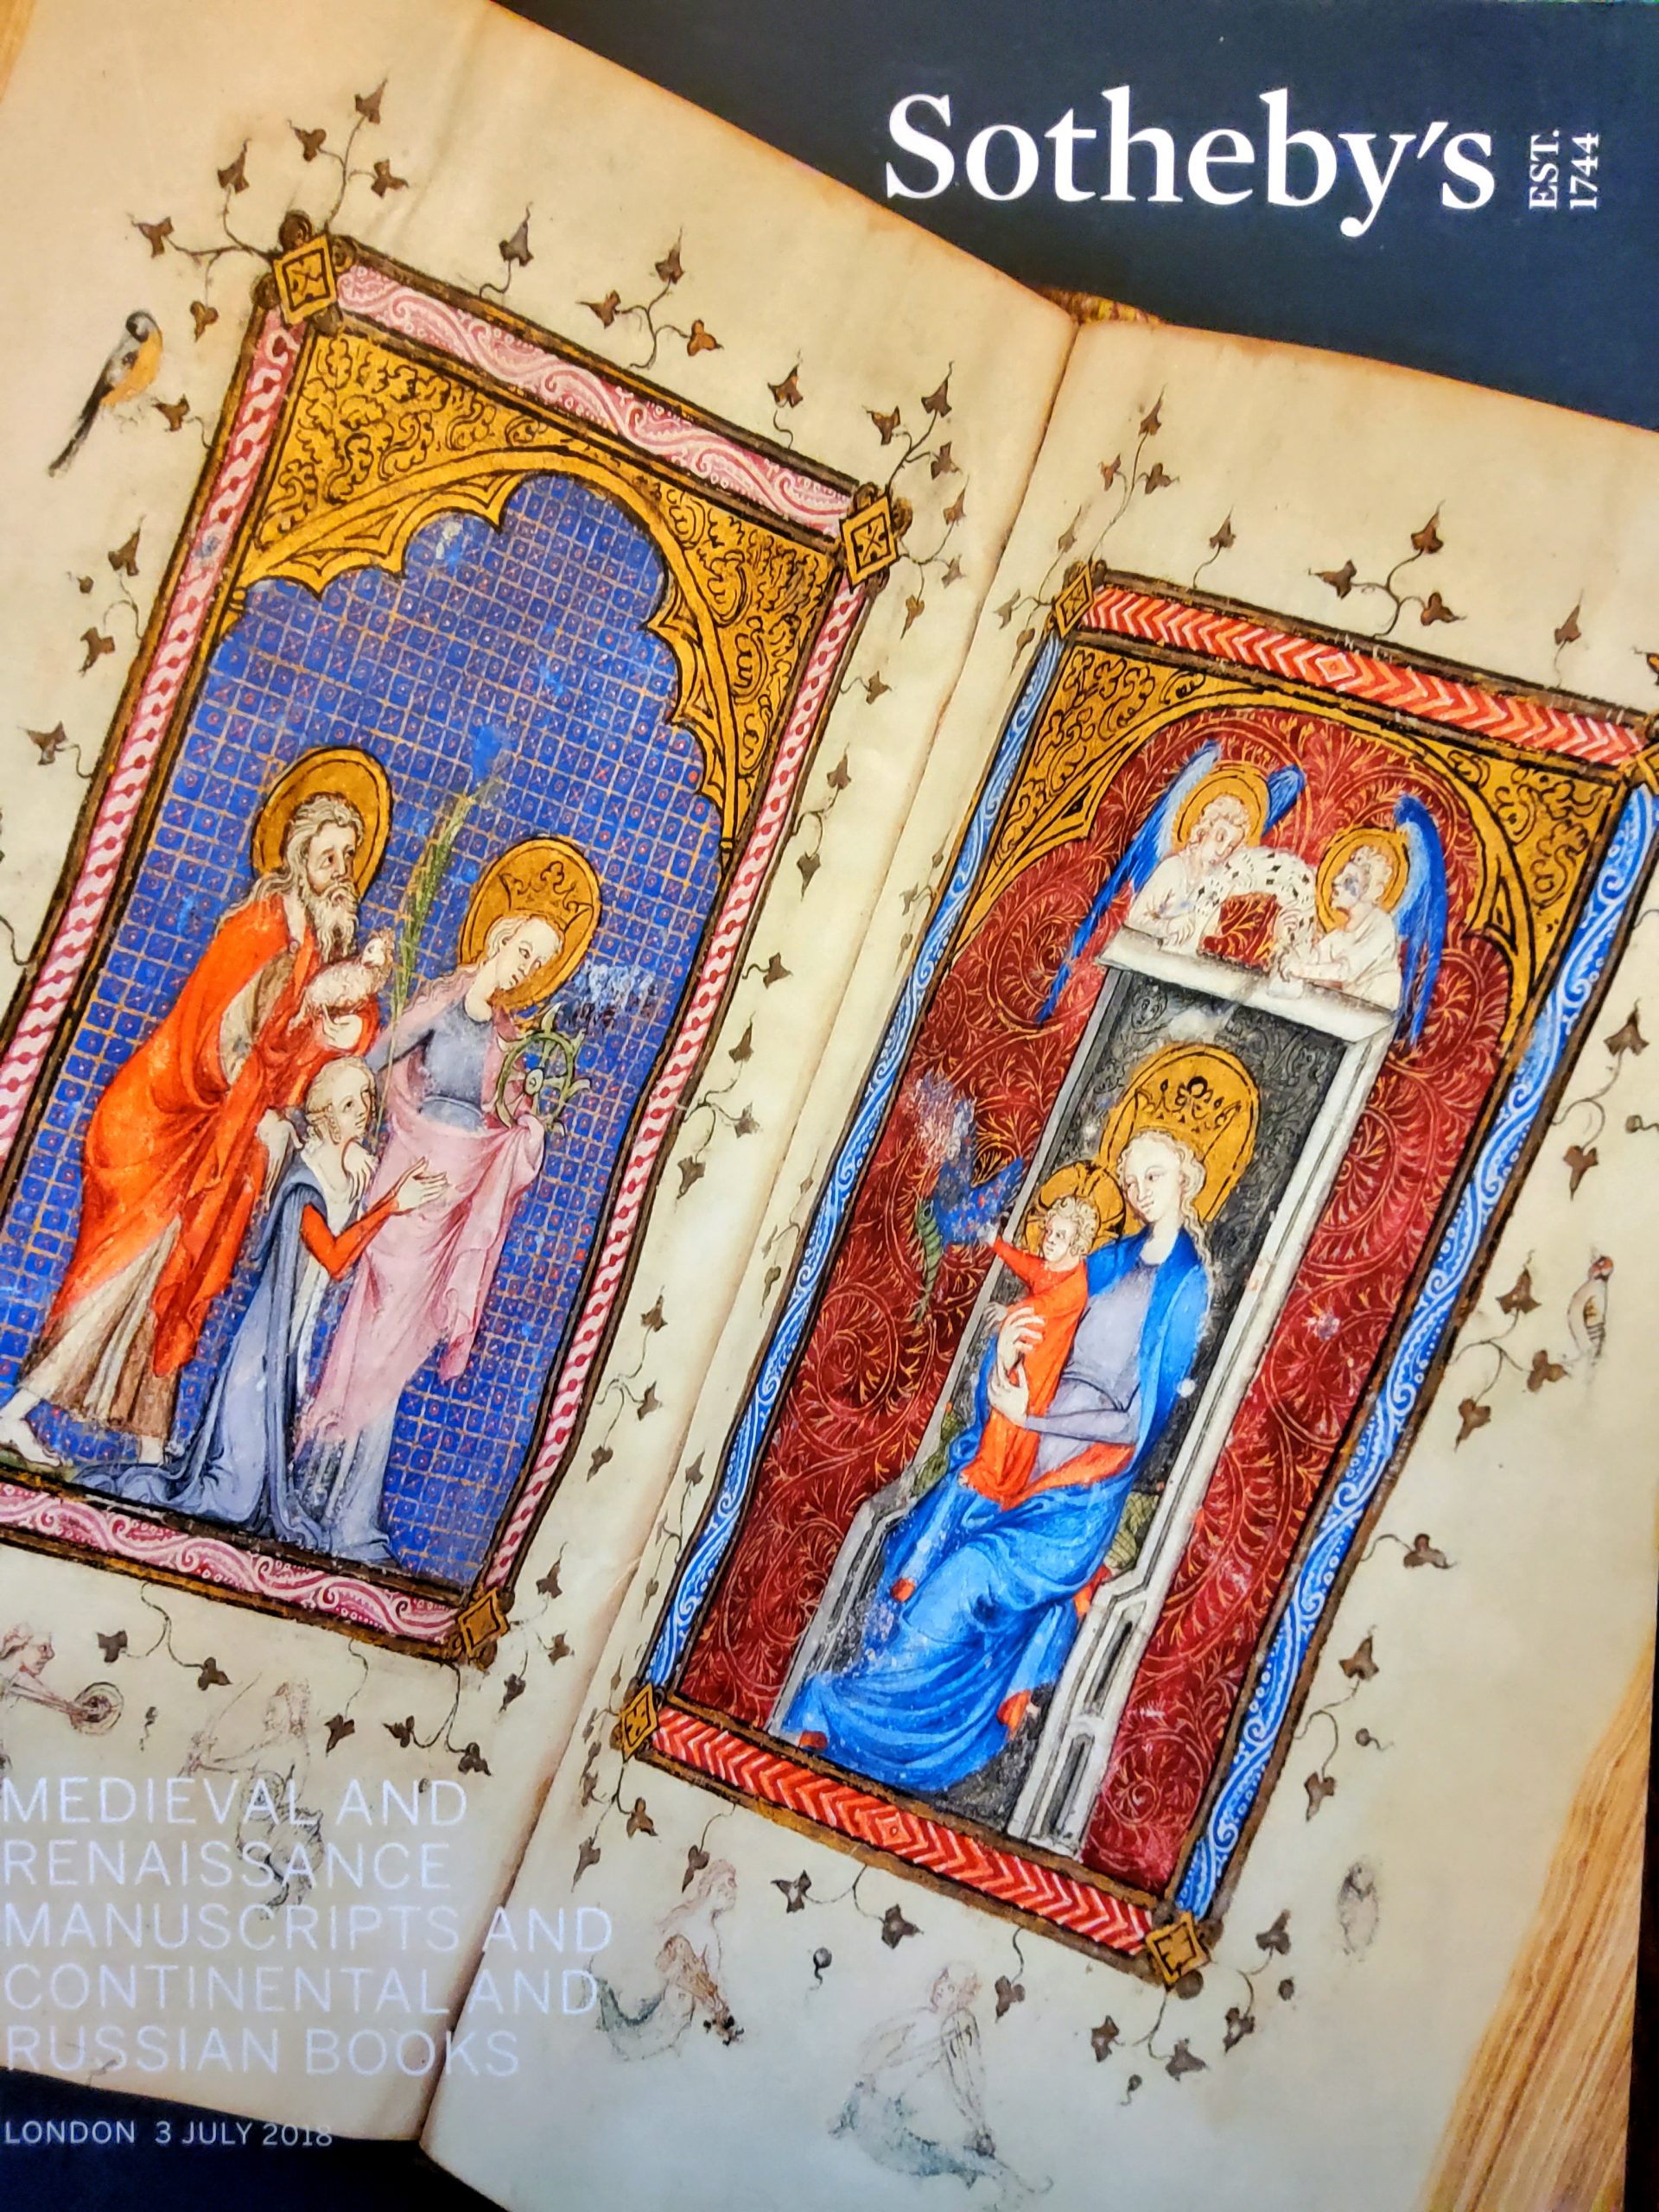 Sotheby’s Catalogues of Western Manuscripts and Miniatures; 9 vols. Assorted collection 2014-2018.